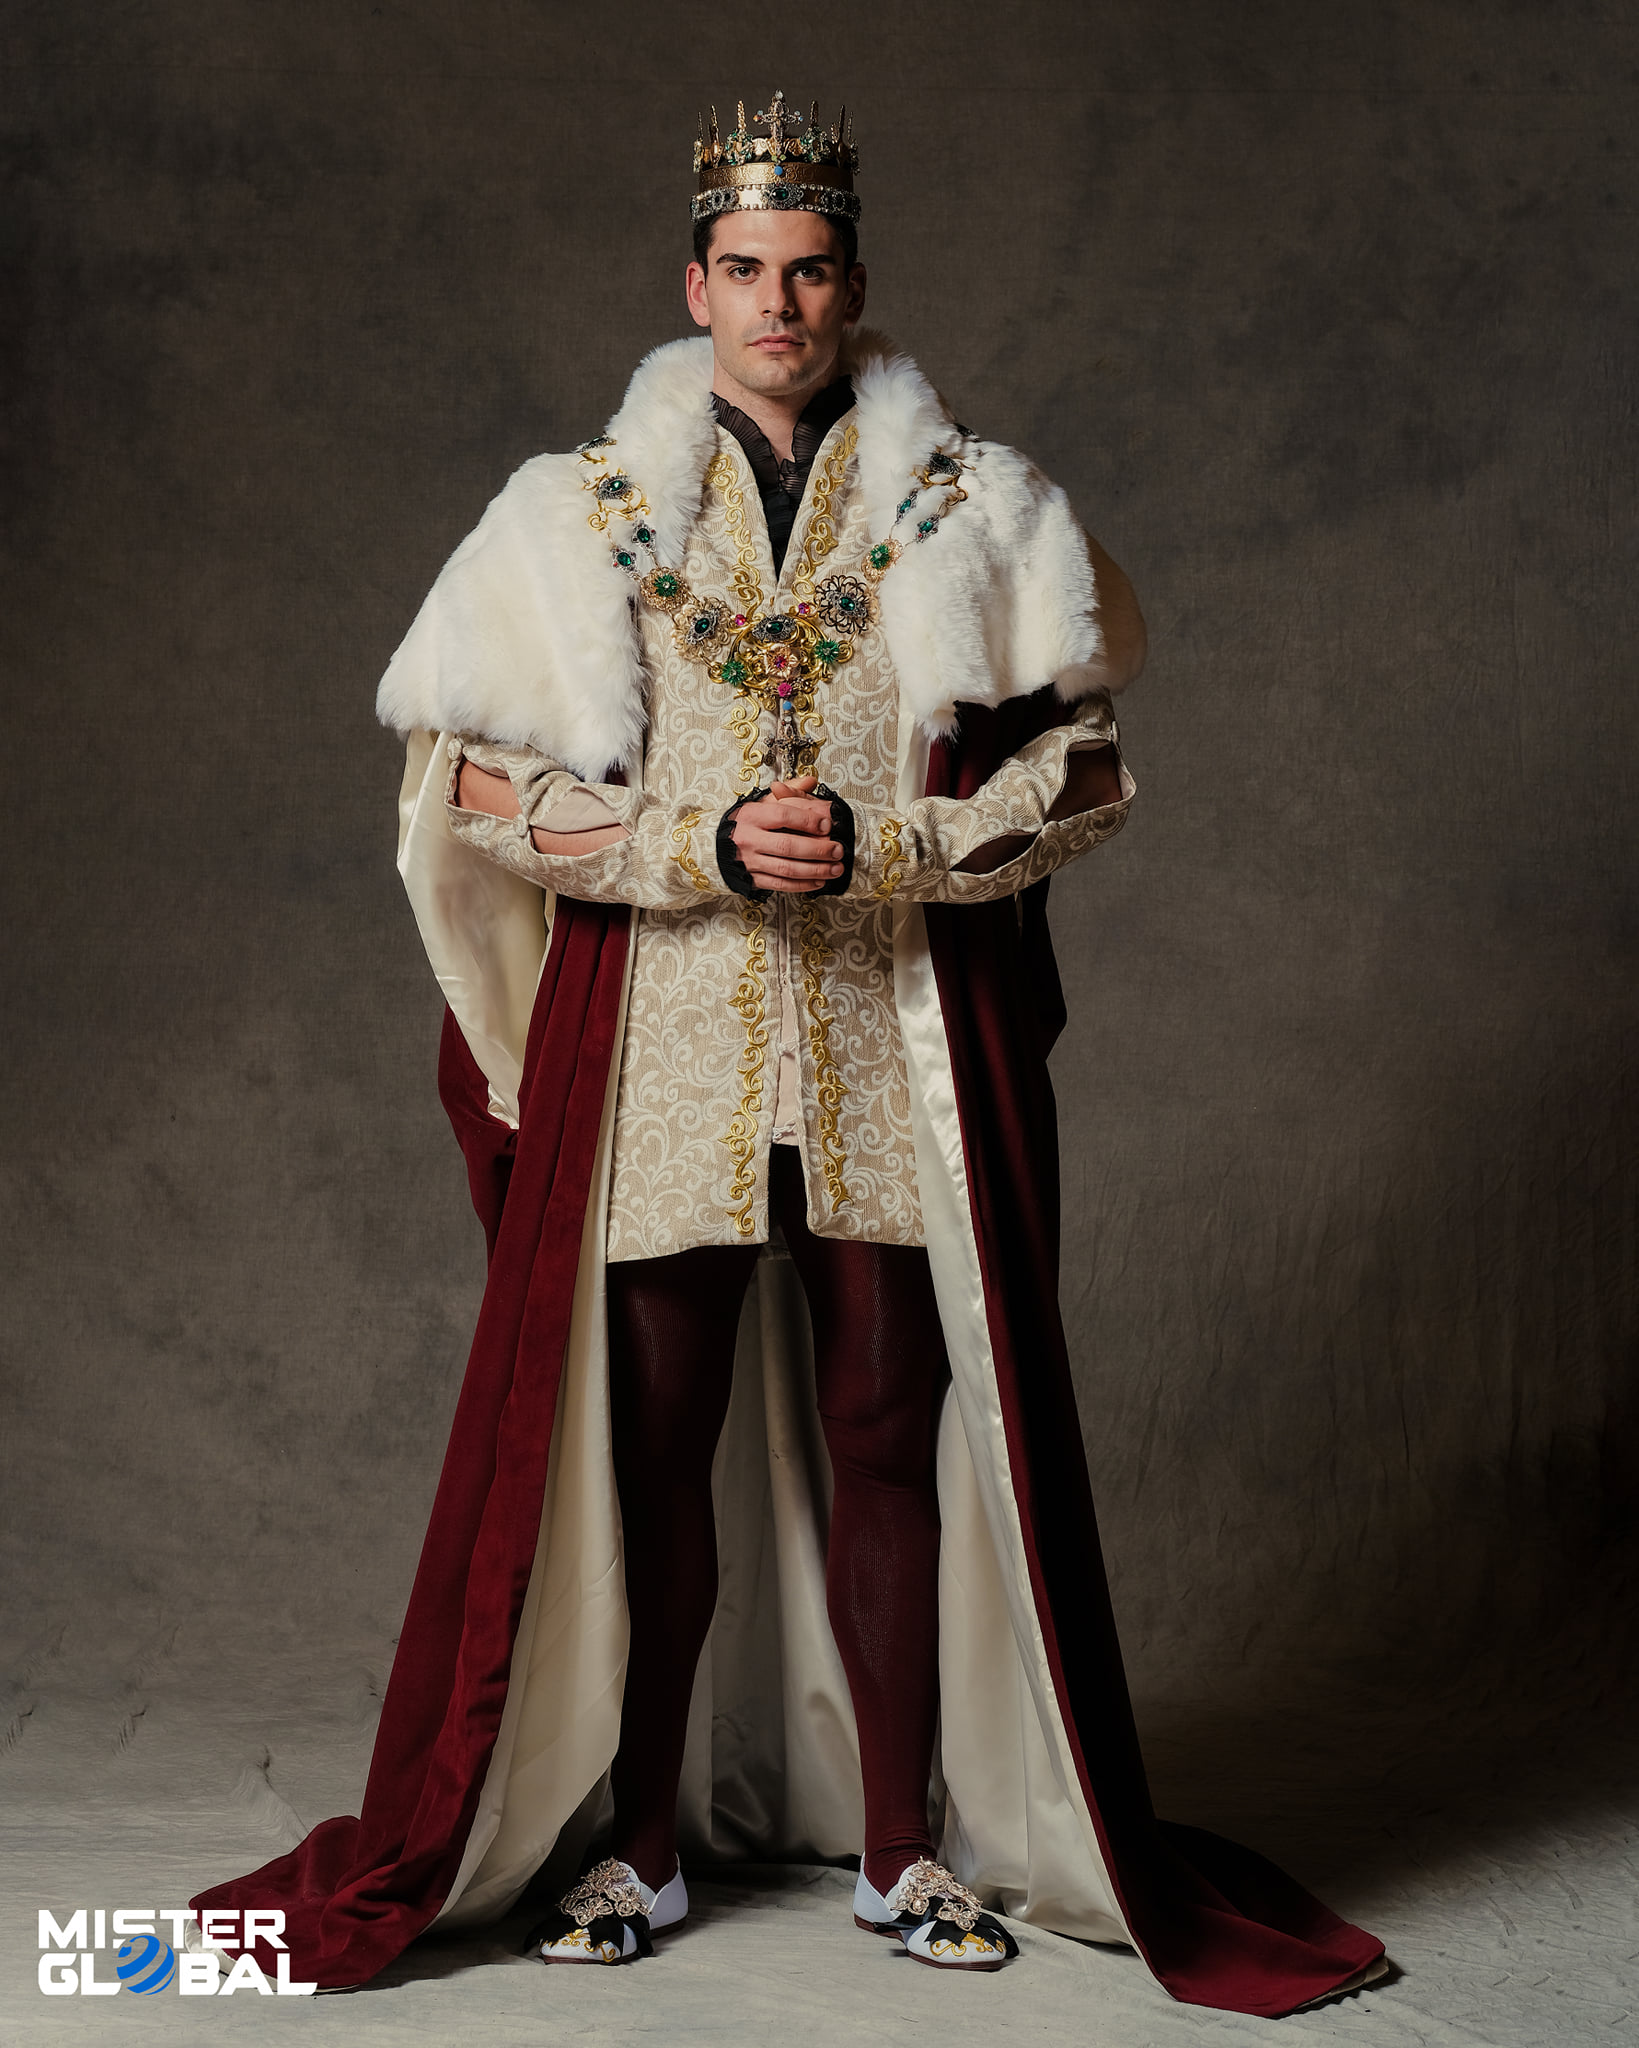 Mister Global 2021 - National Costume Portraits - Page 2 27572615